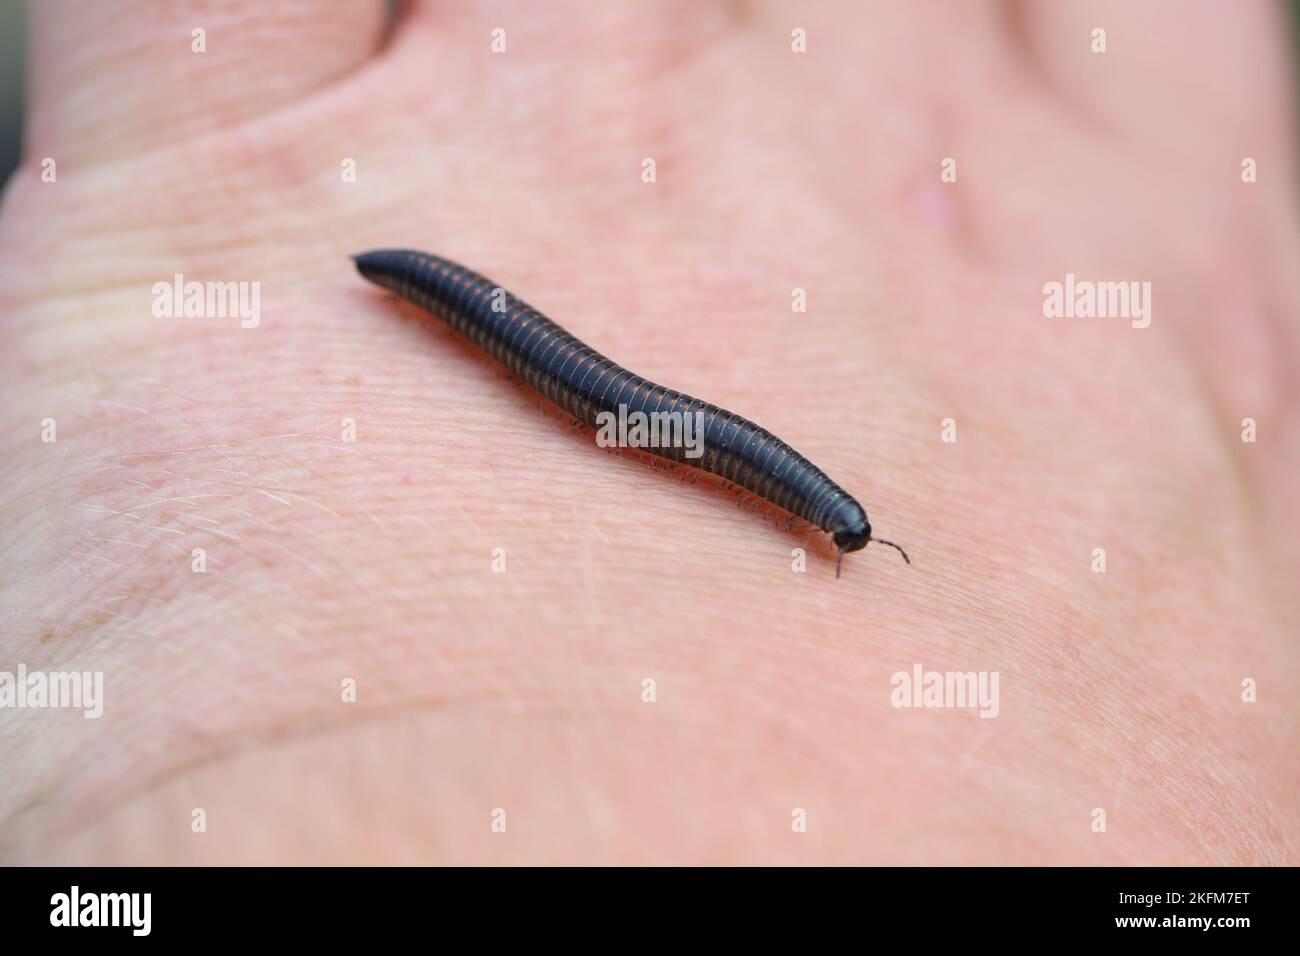 Ommatoiulus sabulosus, also known as the striped millipede, is a European millipede of the family Julidae. Stock Photo